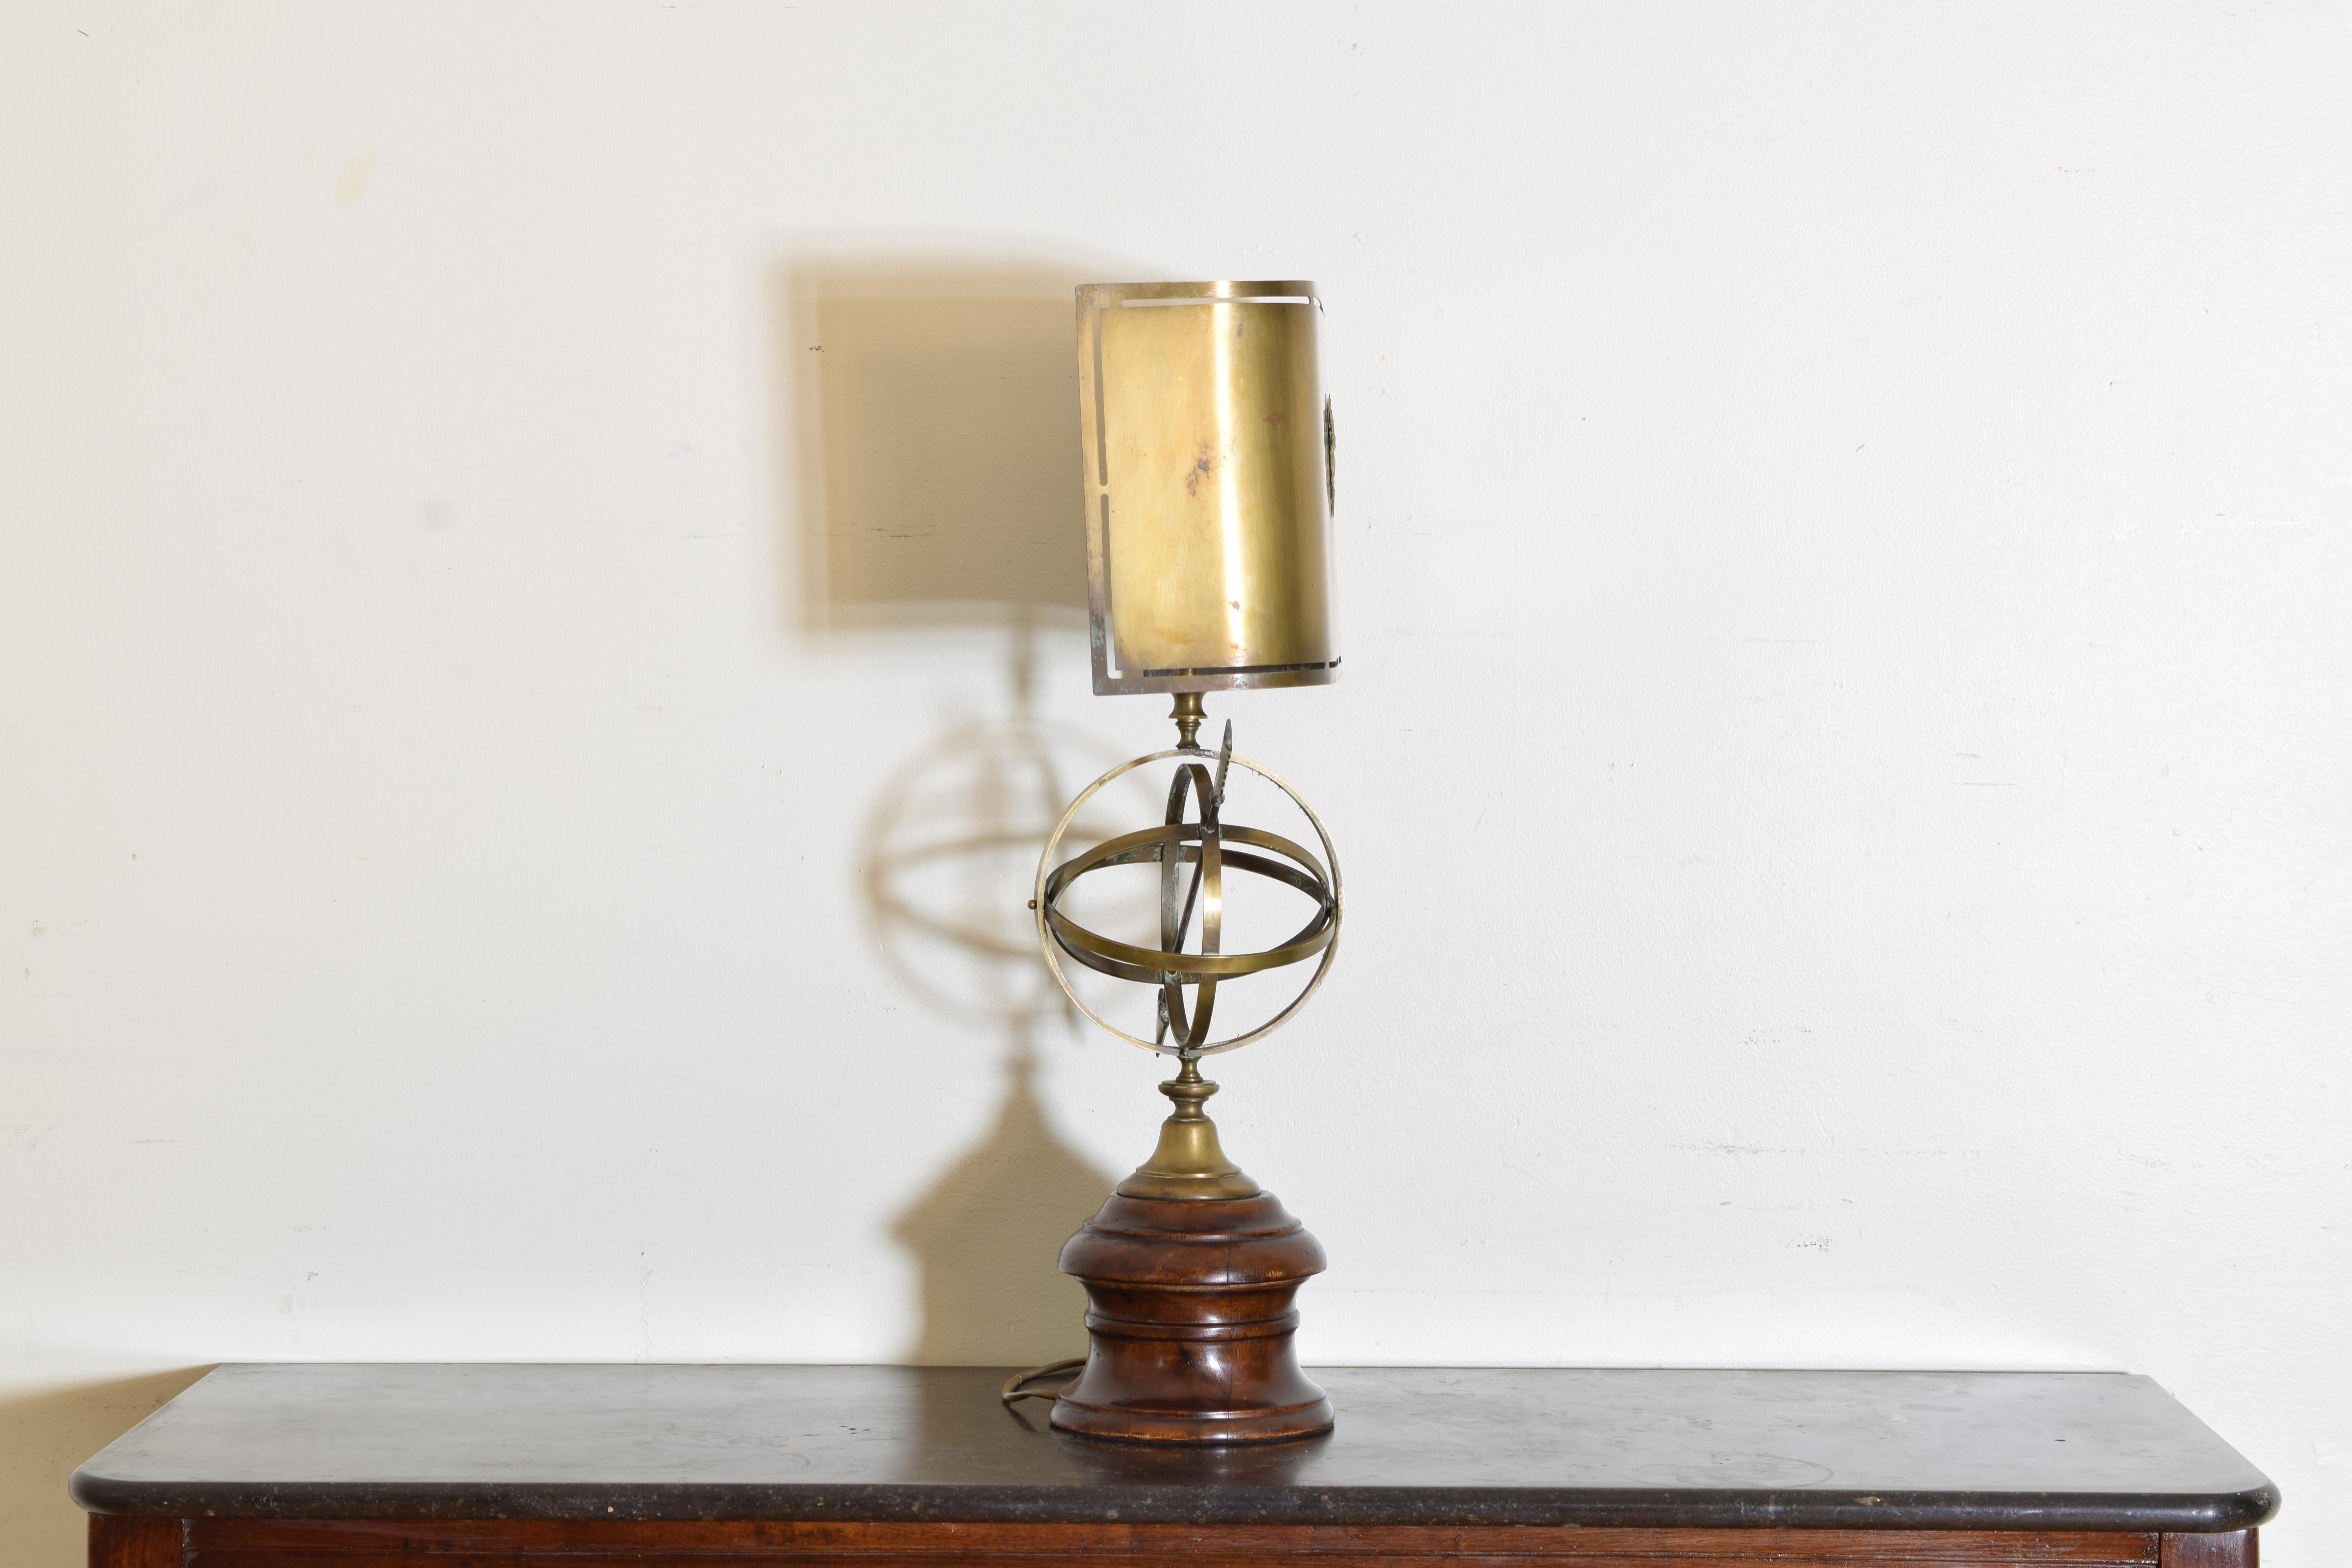 German Early 20th Century Sundial Lamp with a Heraldic Coat of Arms Brass Shade For Sale